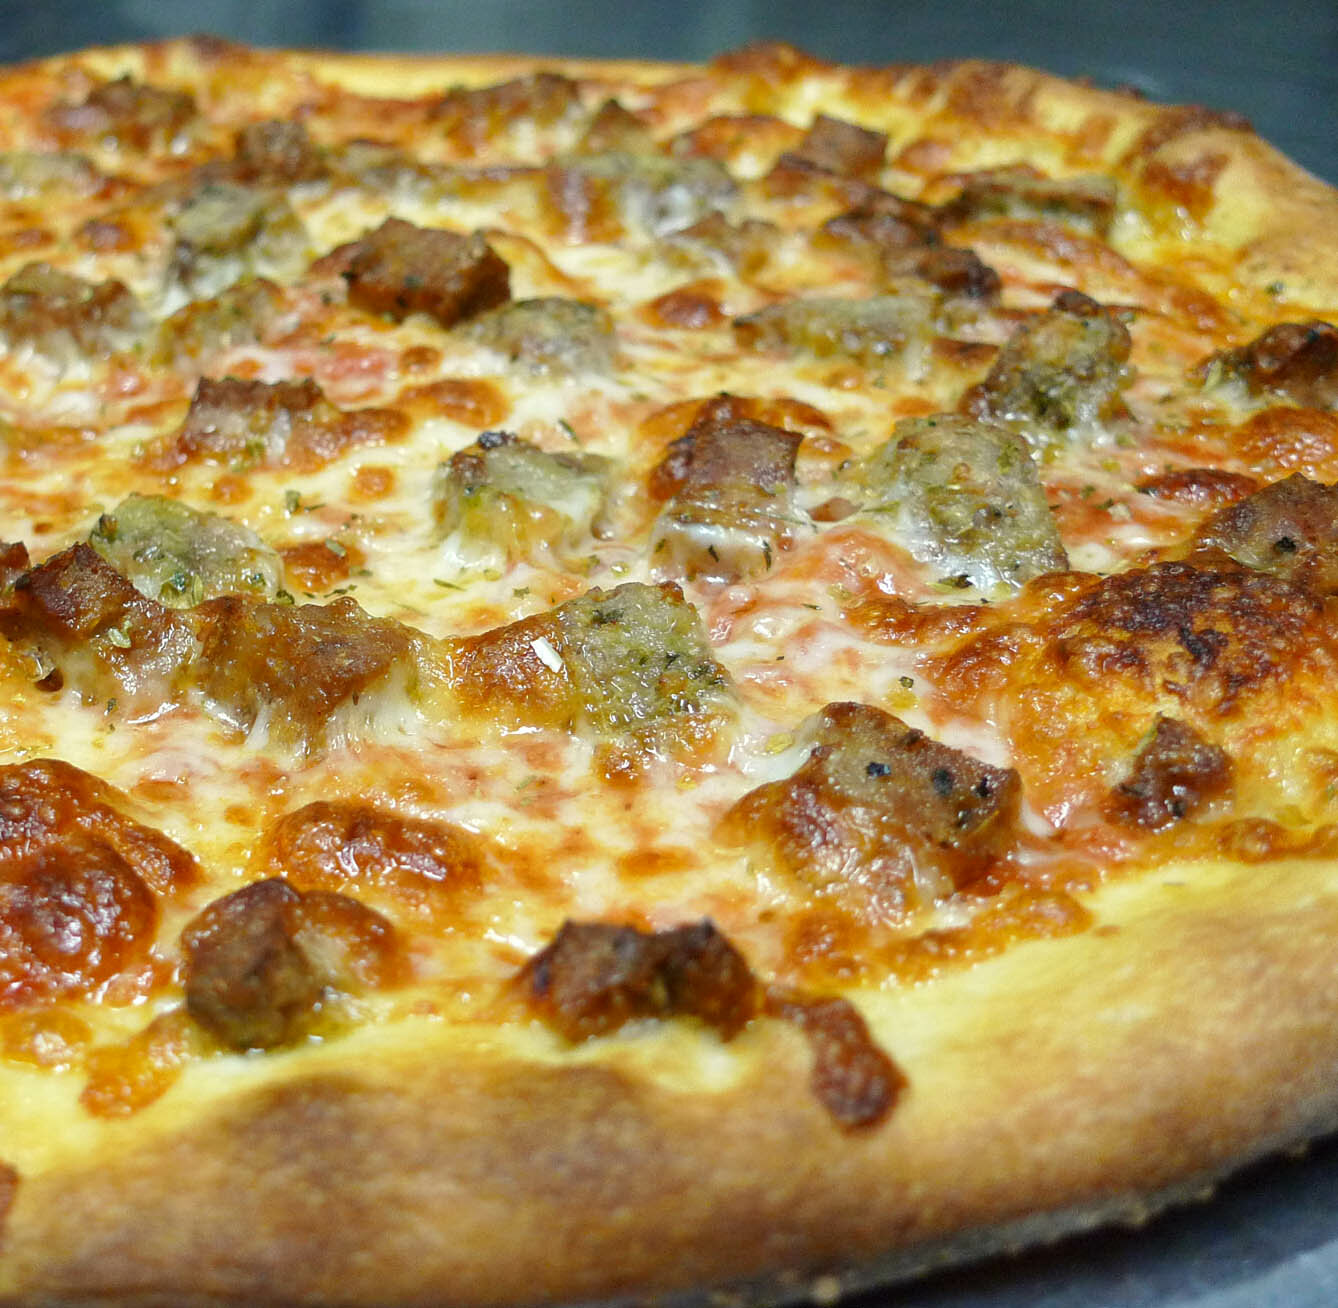 The Anthony pizza is loaded with Italian sausage and peppers.